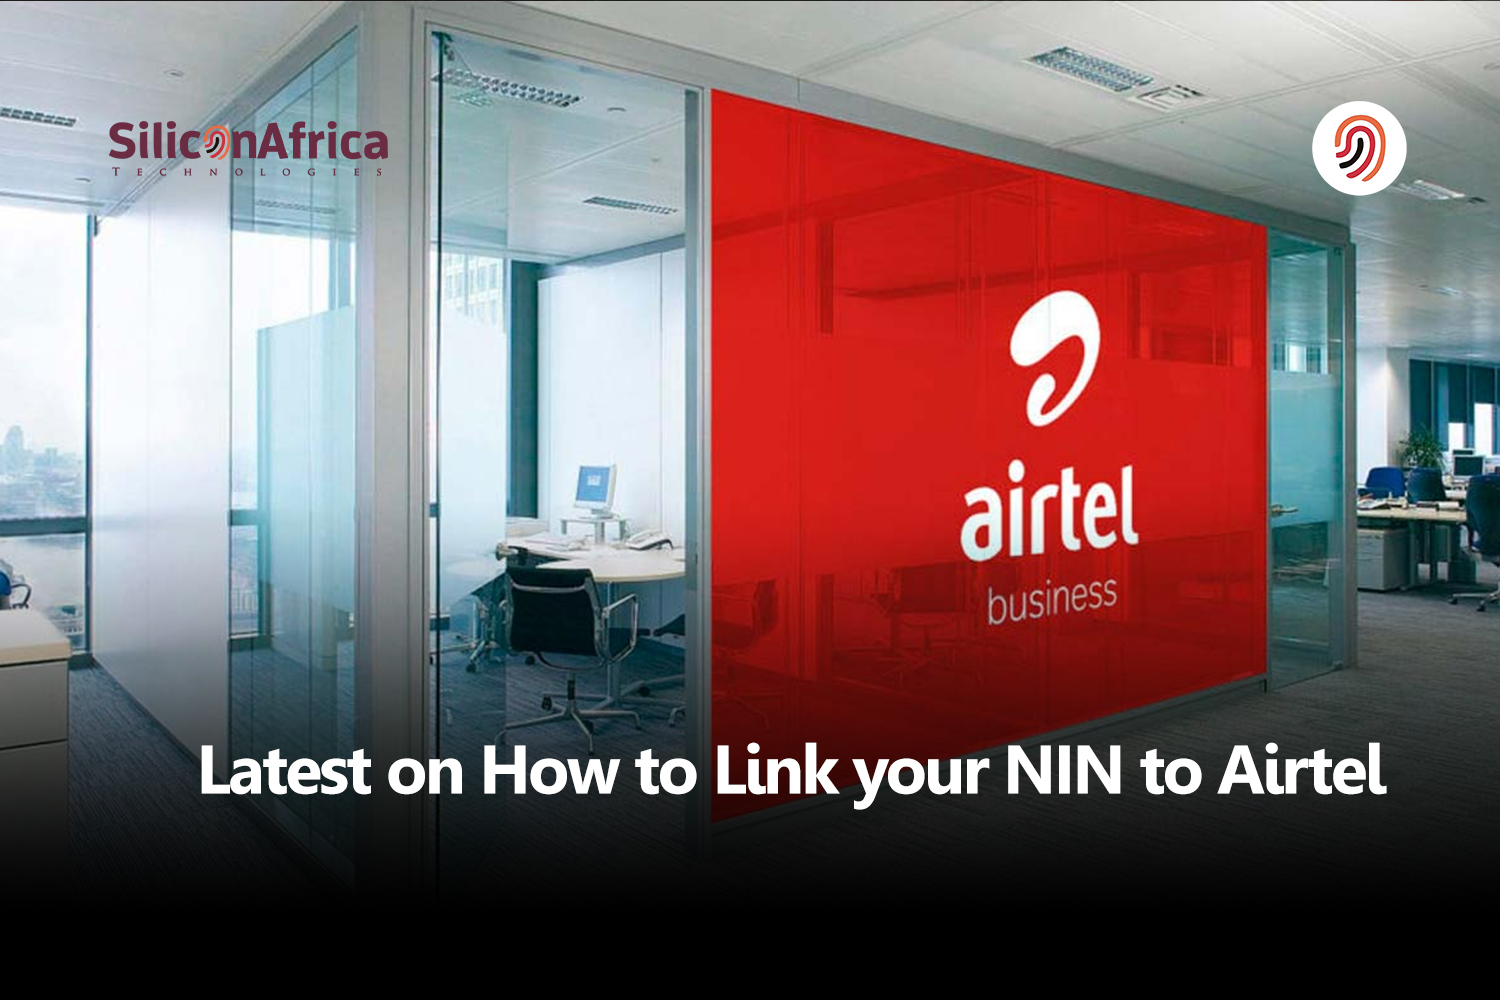 link your NIN to Airtel